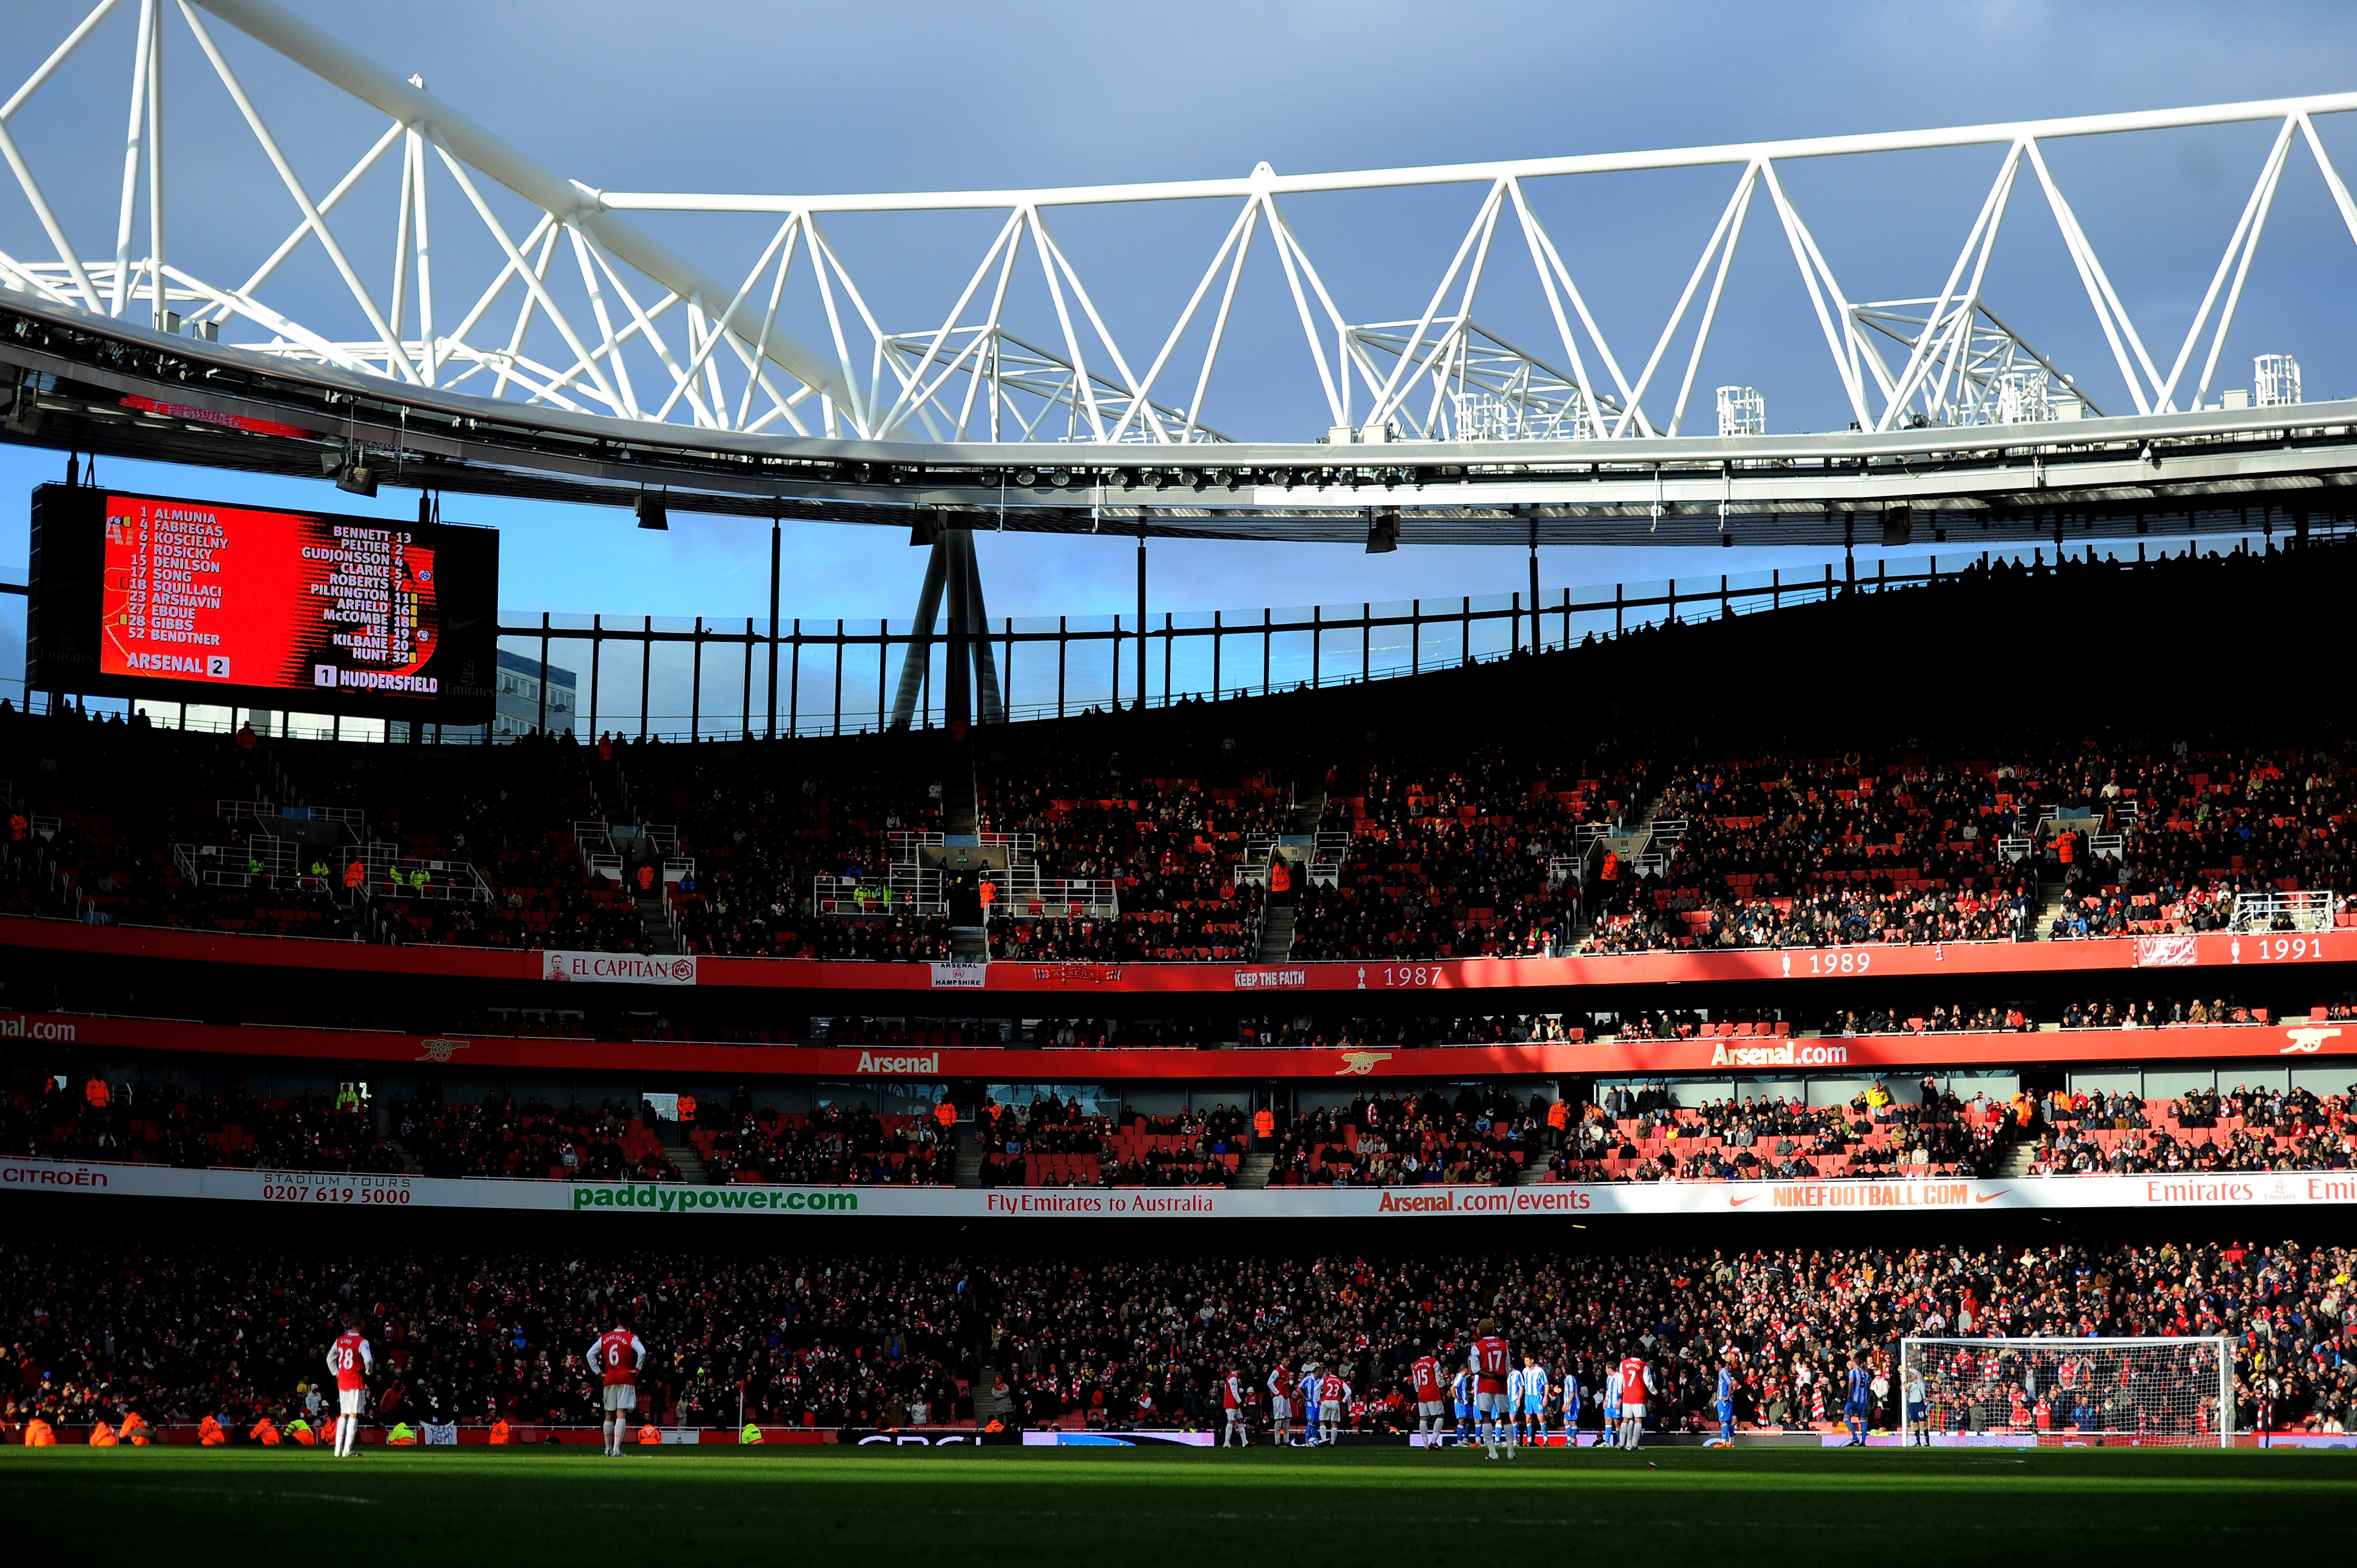 LONDON, ENGLAND - JANUARY 30:  A general view of the Emirates Stadium during the FA Cup sponsored by E.ON fourth round match between Arsenal and Huddersfield Town at The Emirates Stadium on January 30, 2011 in London, England.  (Photo by Clive Mason/Getty Images)